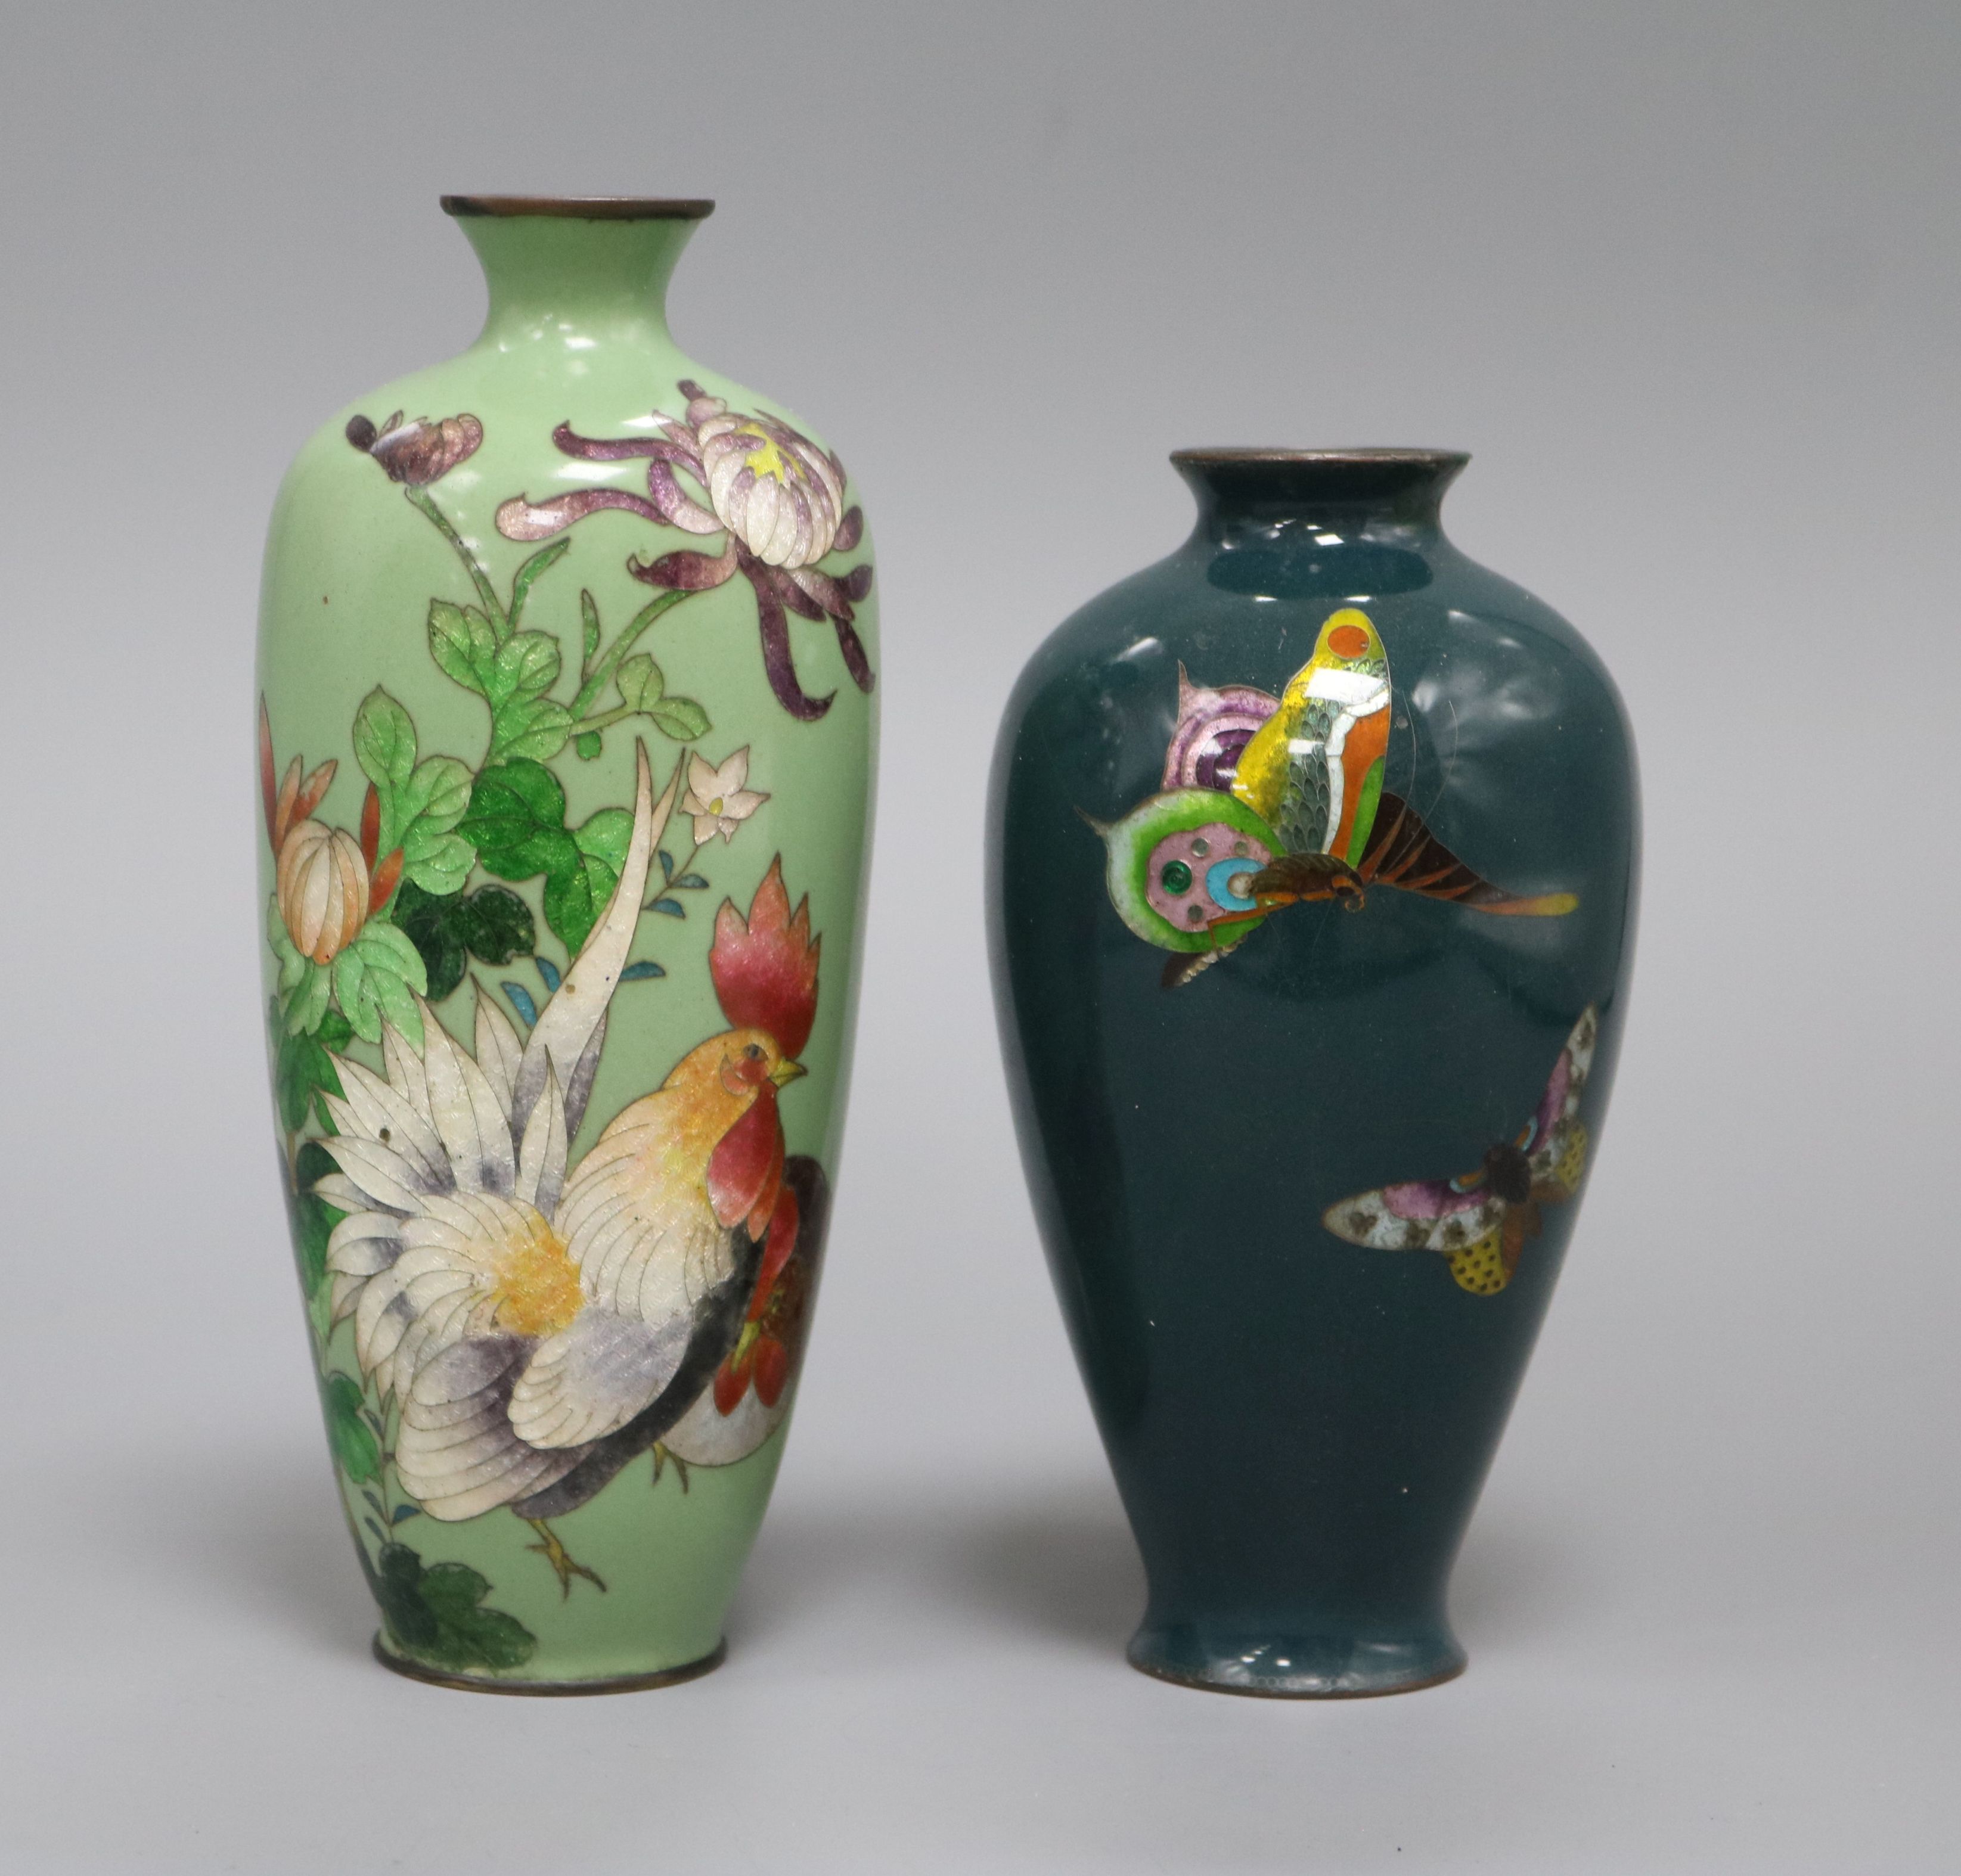 A Japanese Ginbari enamelled vase decorated with a cockerel on a green ground and a smaller vase